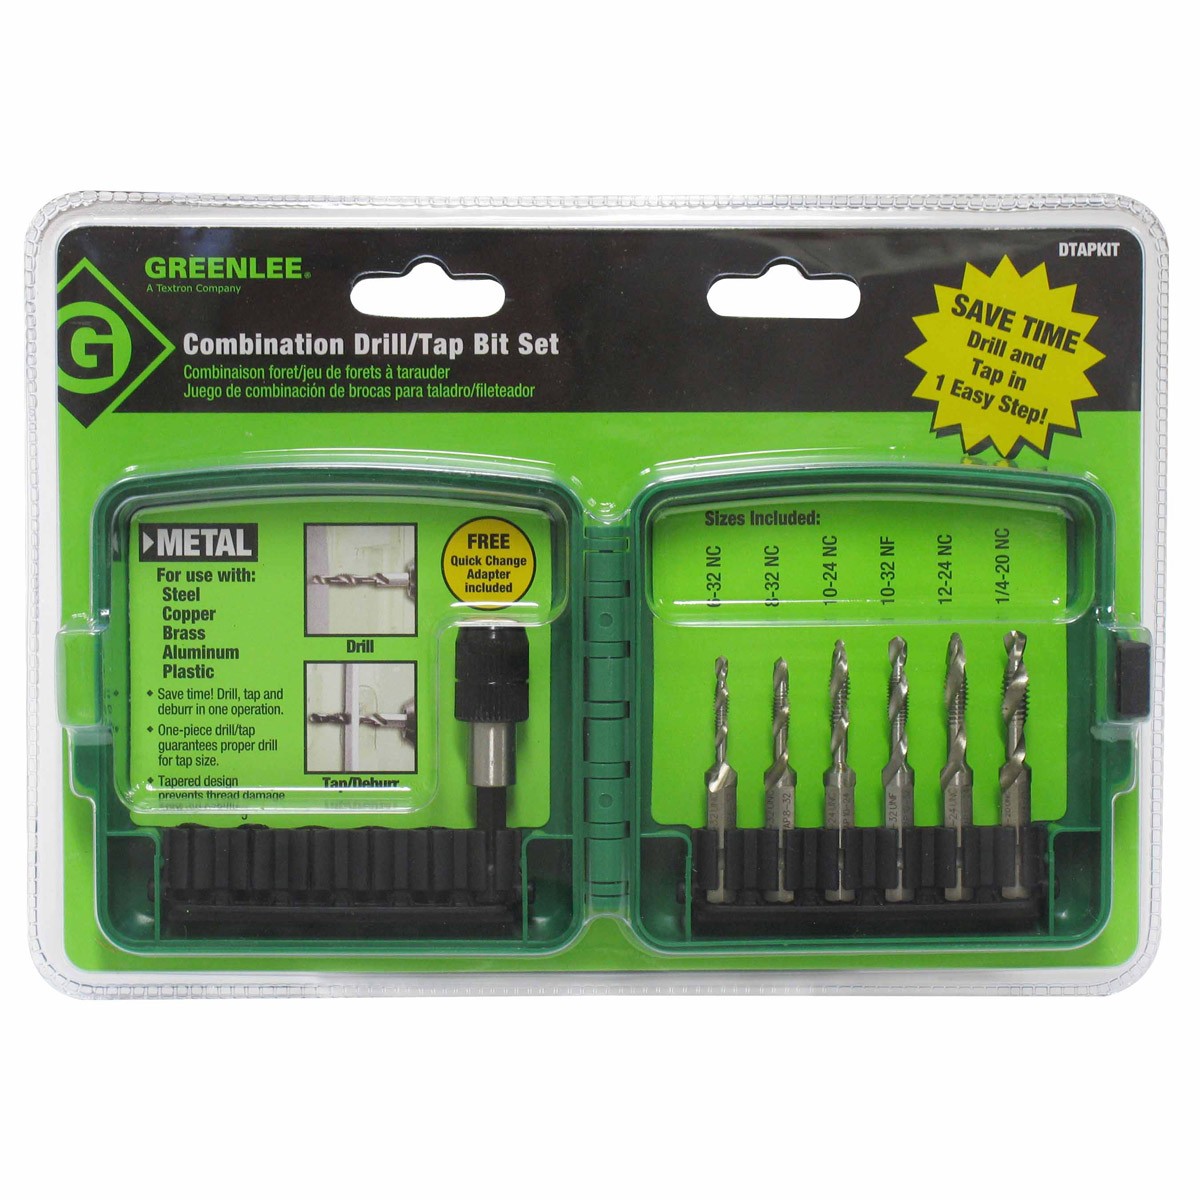 Greenlee DTAPKIT 6-32 to 1/4-20 6 Piece Drill/Tap Set